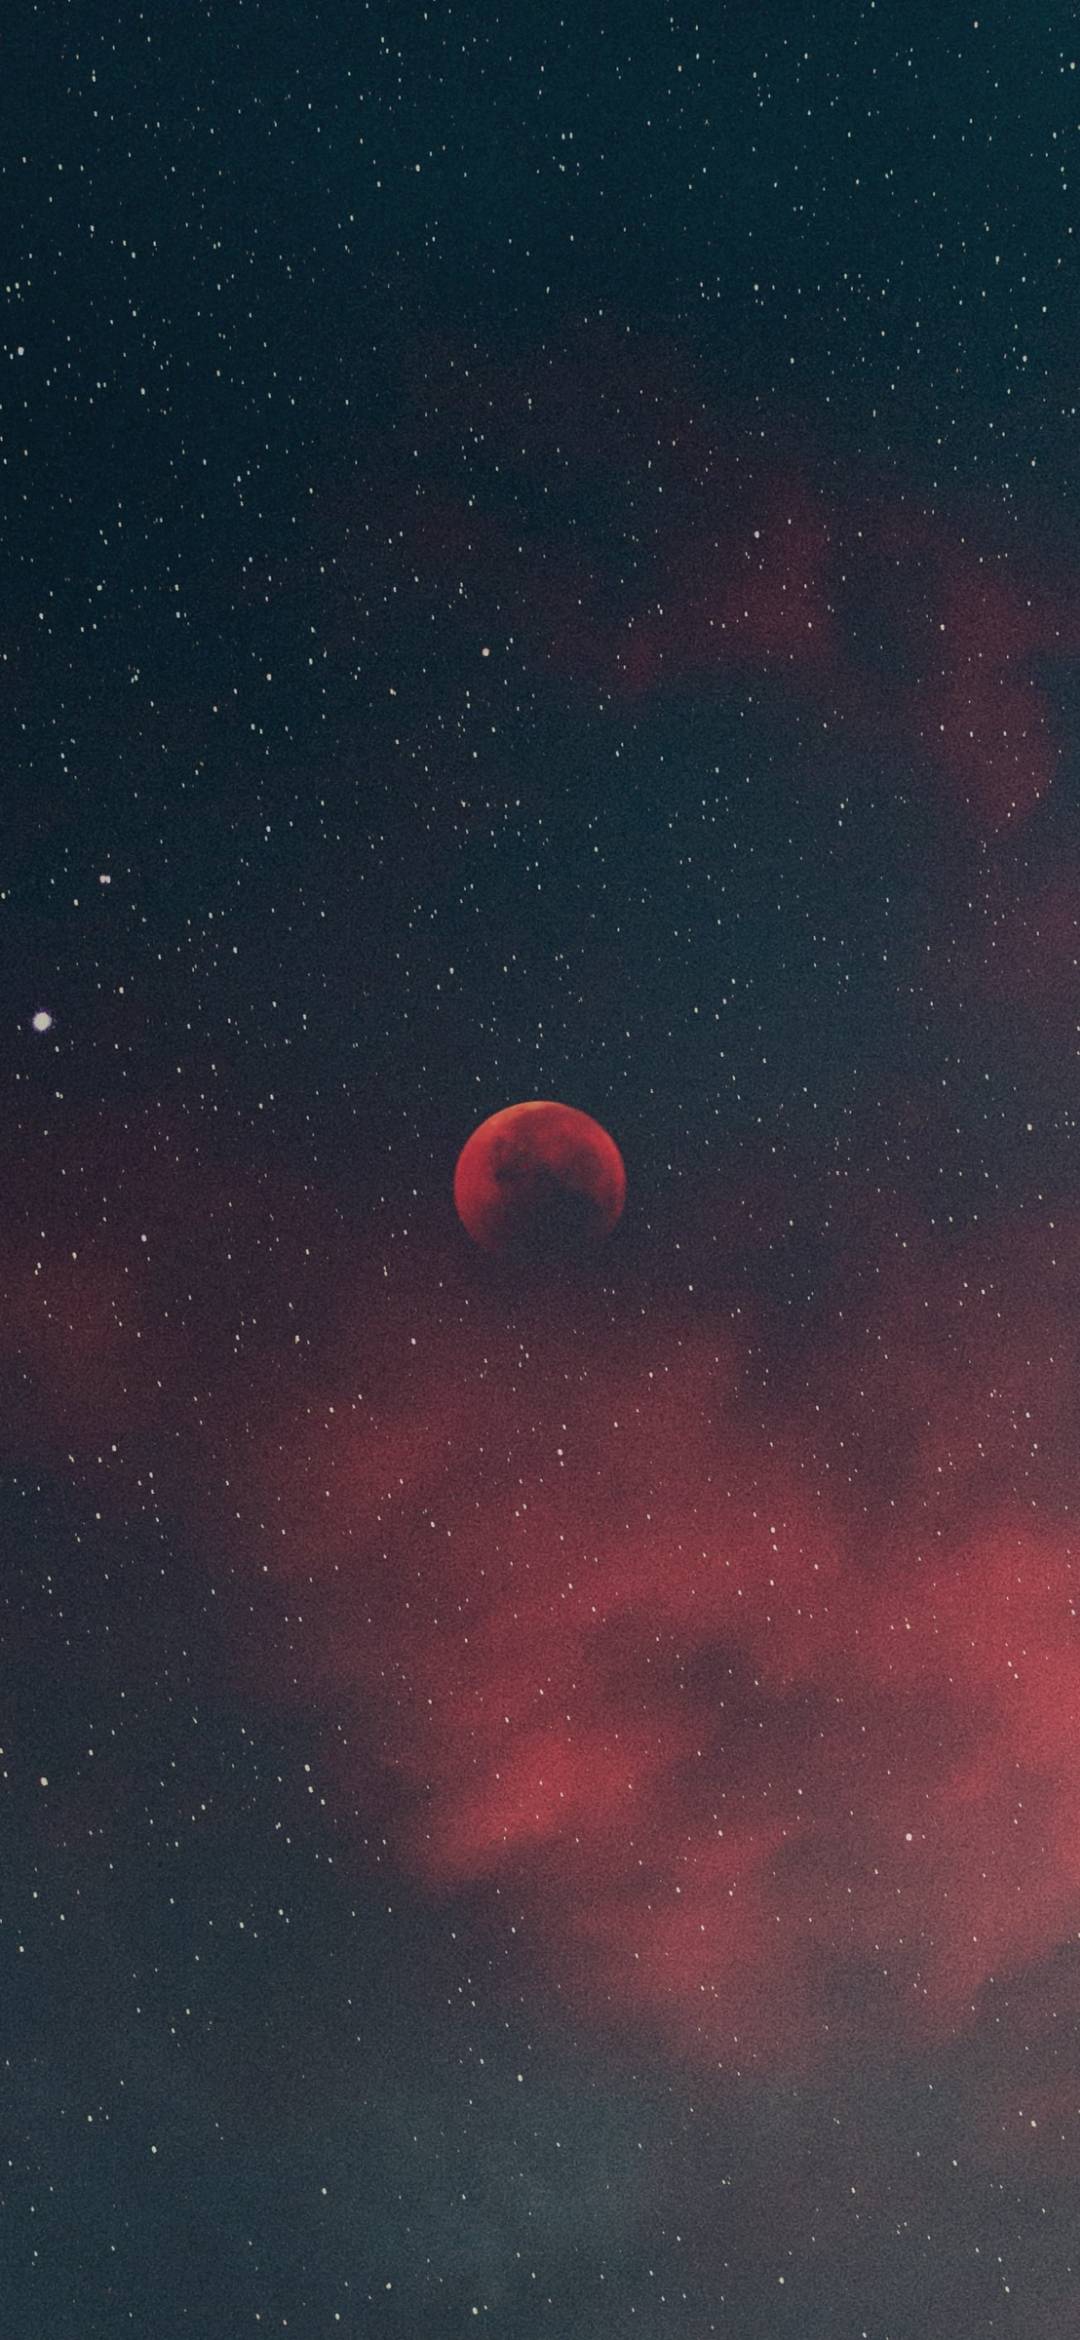 Space Wallpaper for Phone- 132